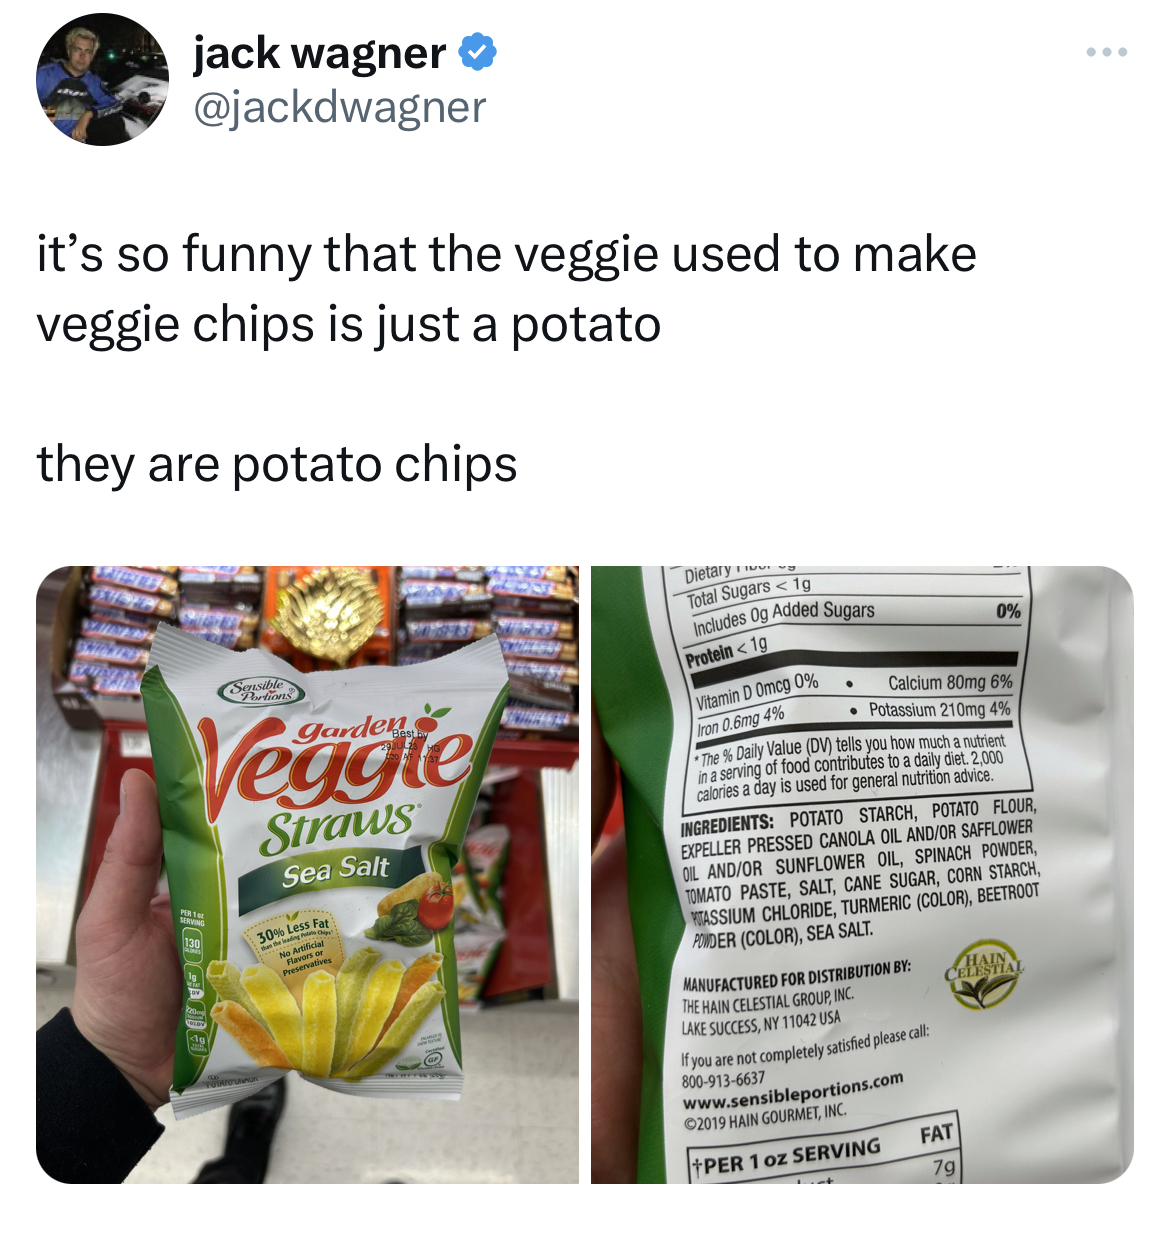 savage tweets - 苗栗縣立體育場 - jack wagner it's so funny that the veggie used to make veggie chips is just a potato they are potato chips garden Straws Sea Salt Sa Dietary You Sugars g voludes Op Added Sugar Prebeing vitamin D Omp 0% ng 4% Maufactured For Dist